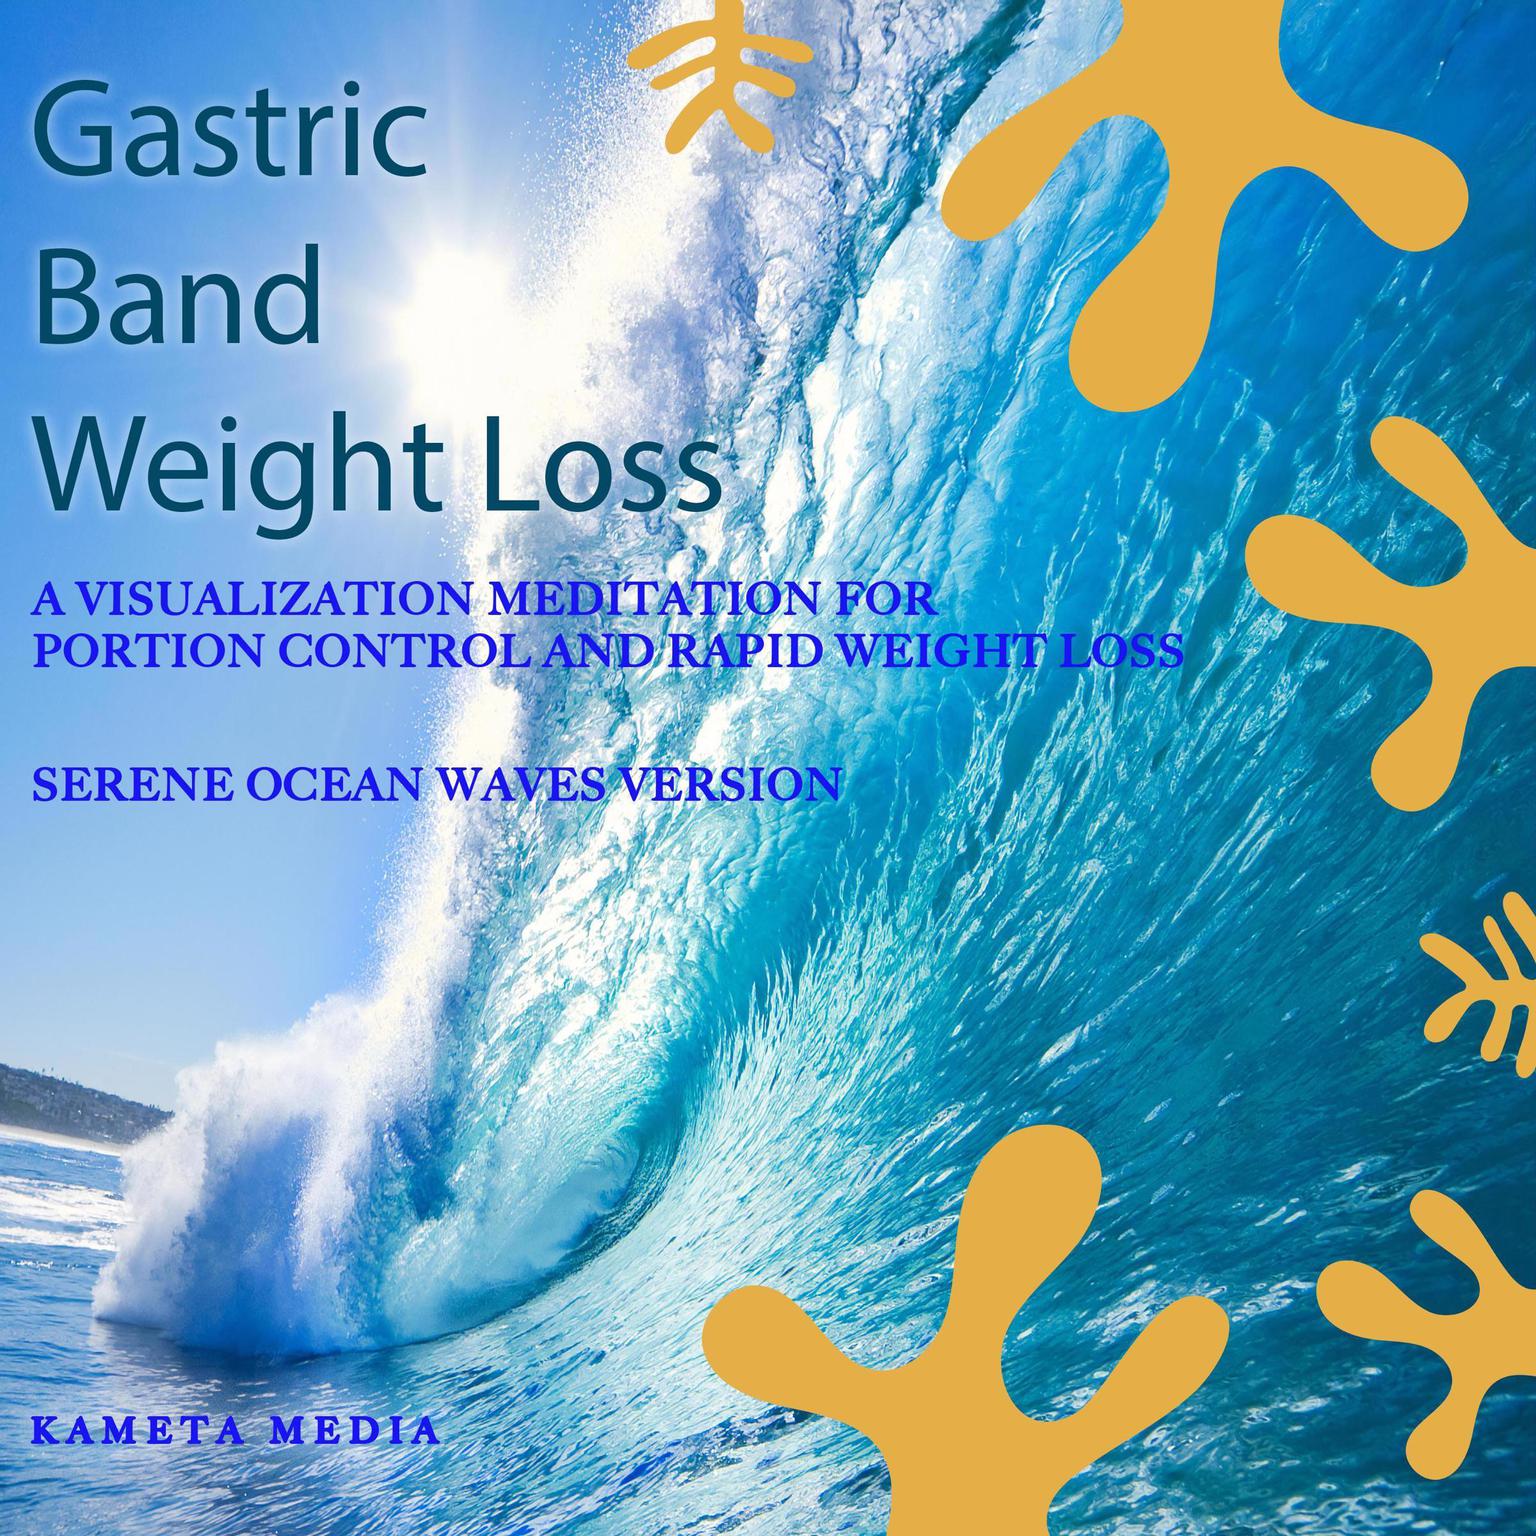 Gastric Band Weight Loss: A Visualization Meditation for Portion Control and Rapid Weight Loss (Serene Ocean Waves Version) Audiobook, by Kameta Media